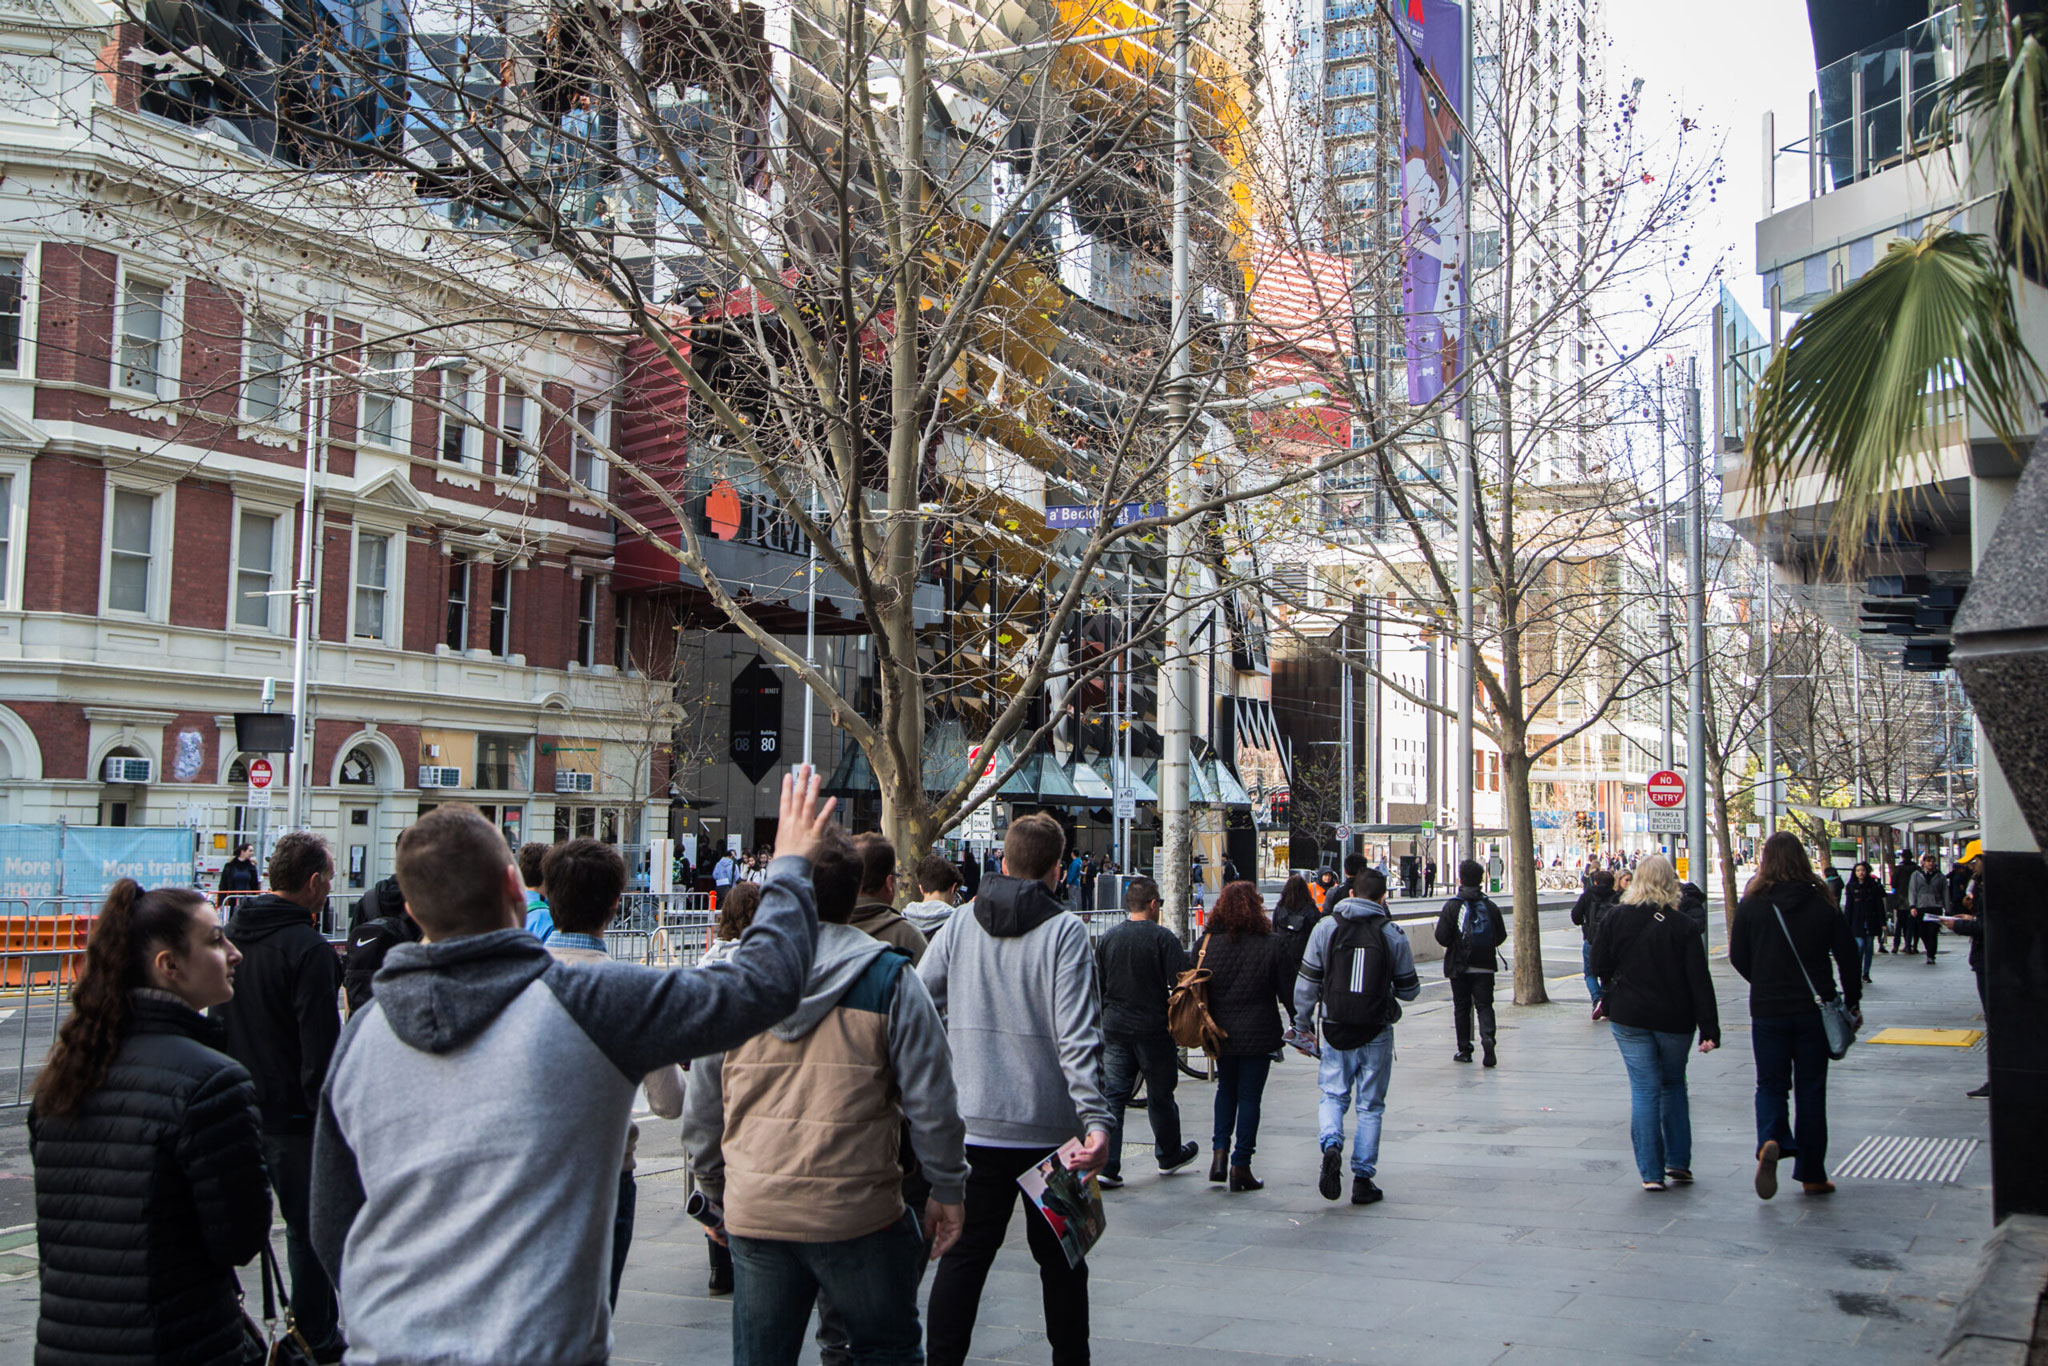 A group of people walk along Swanston street in the Melbourne CBD. RMIT is featured in the background